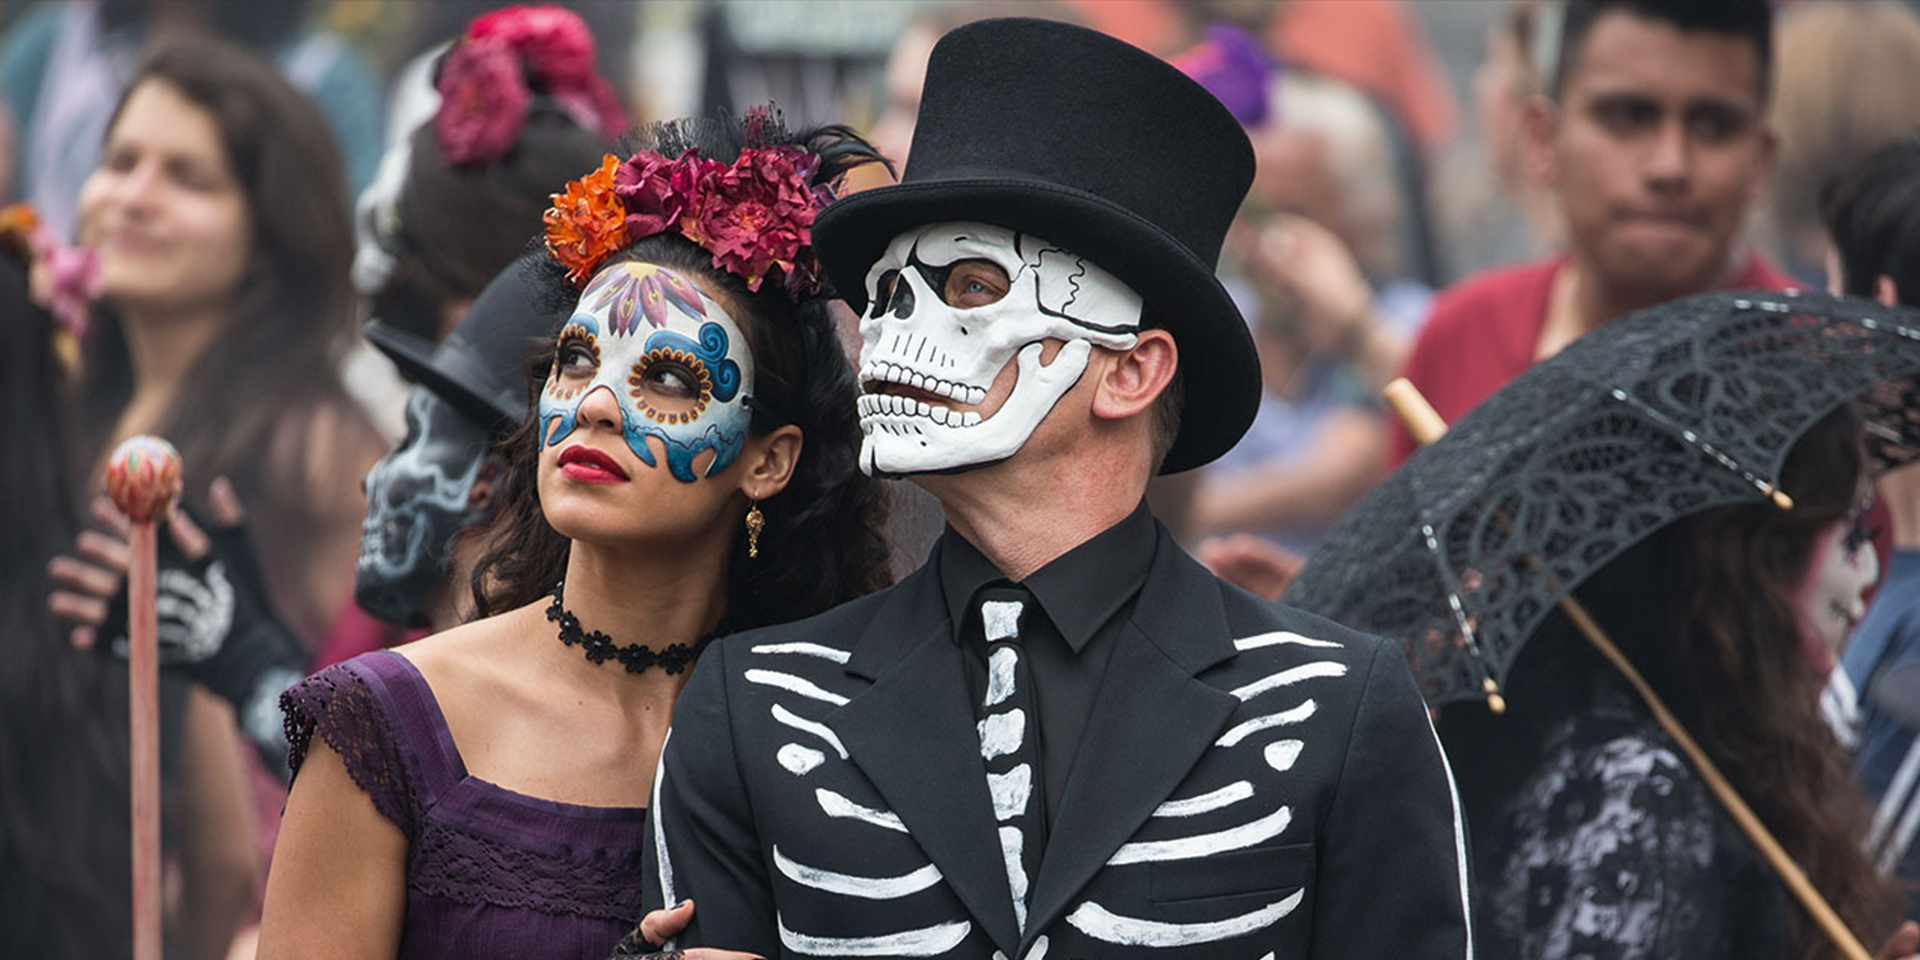 MI6 Agent James Bond and his partner attend the Day of the Dead festivities in Mexico.